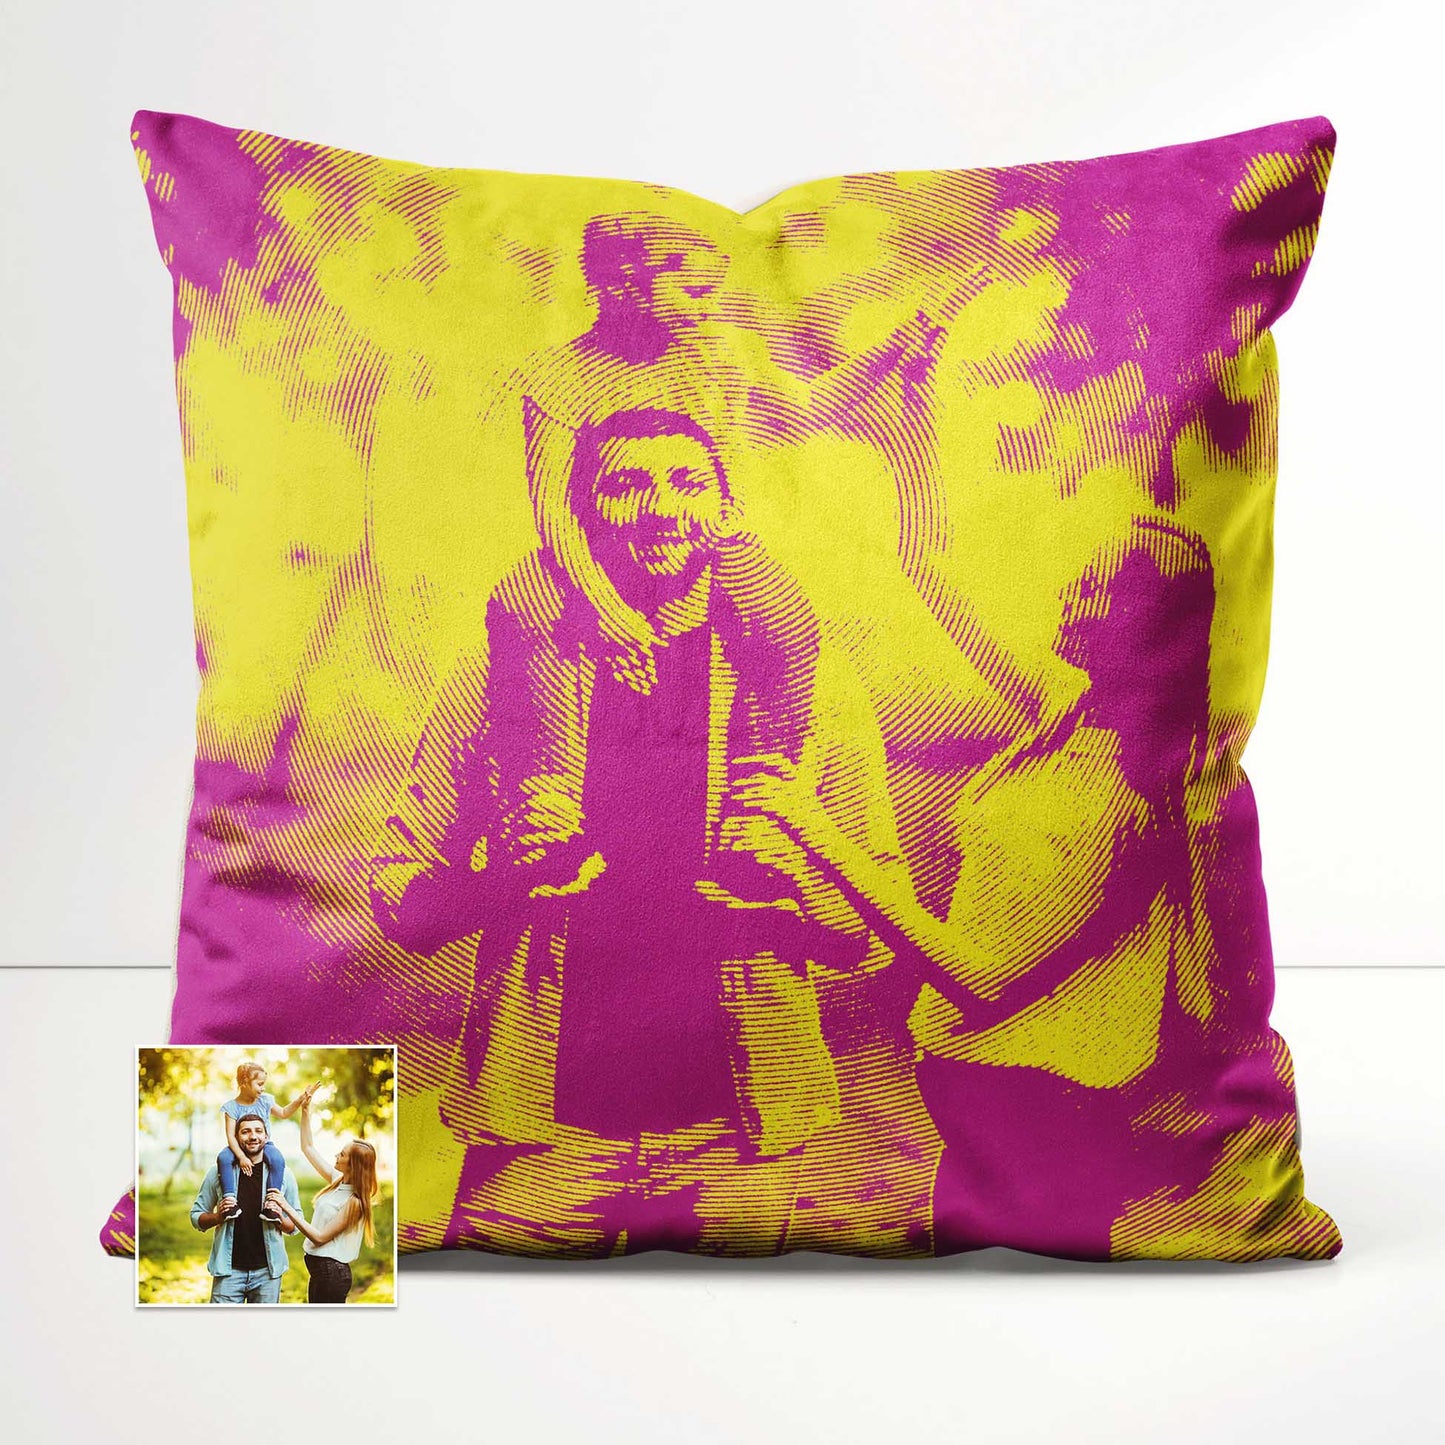 Experience the warmth of the sun with a Personalised Yellow & Pink Texture Cushion. Its soft furnishing and velvet fabric provide a cozy and comfortable feel. Custom printed from your photo, this cushion adds a unique and personal touch